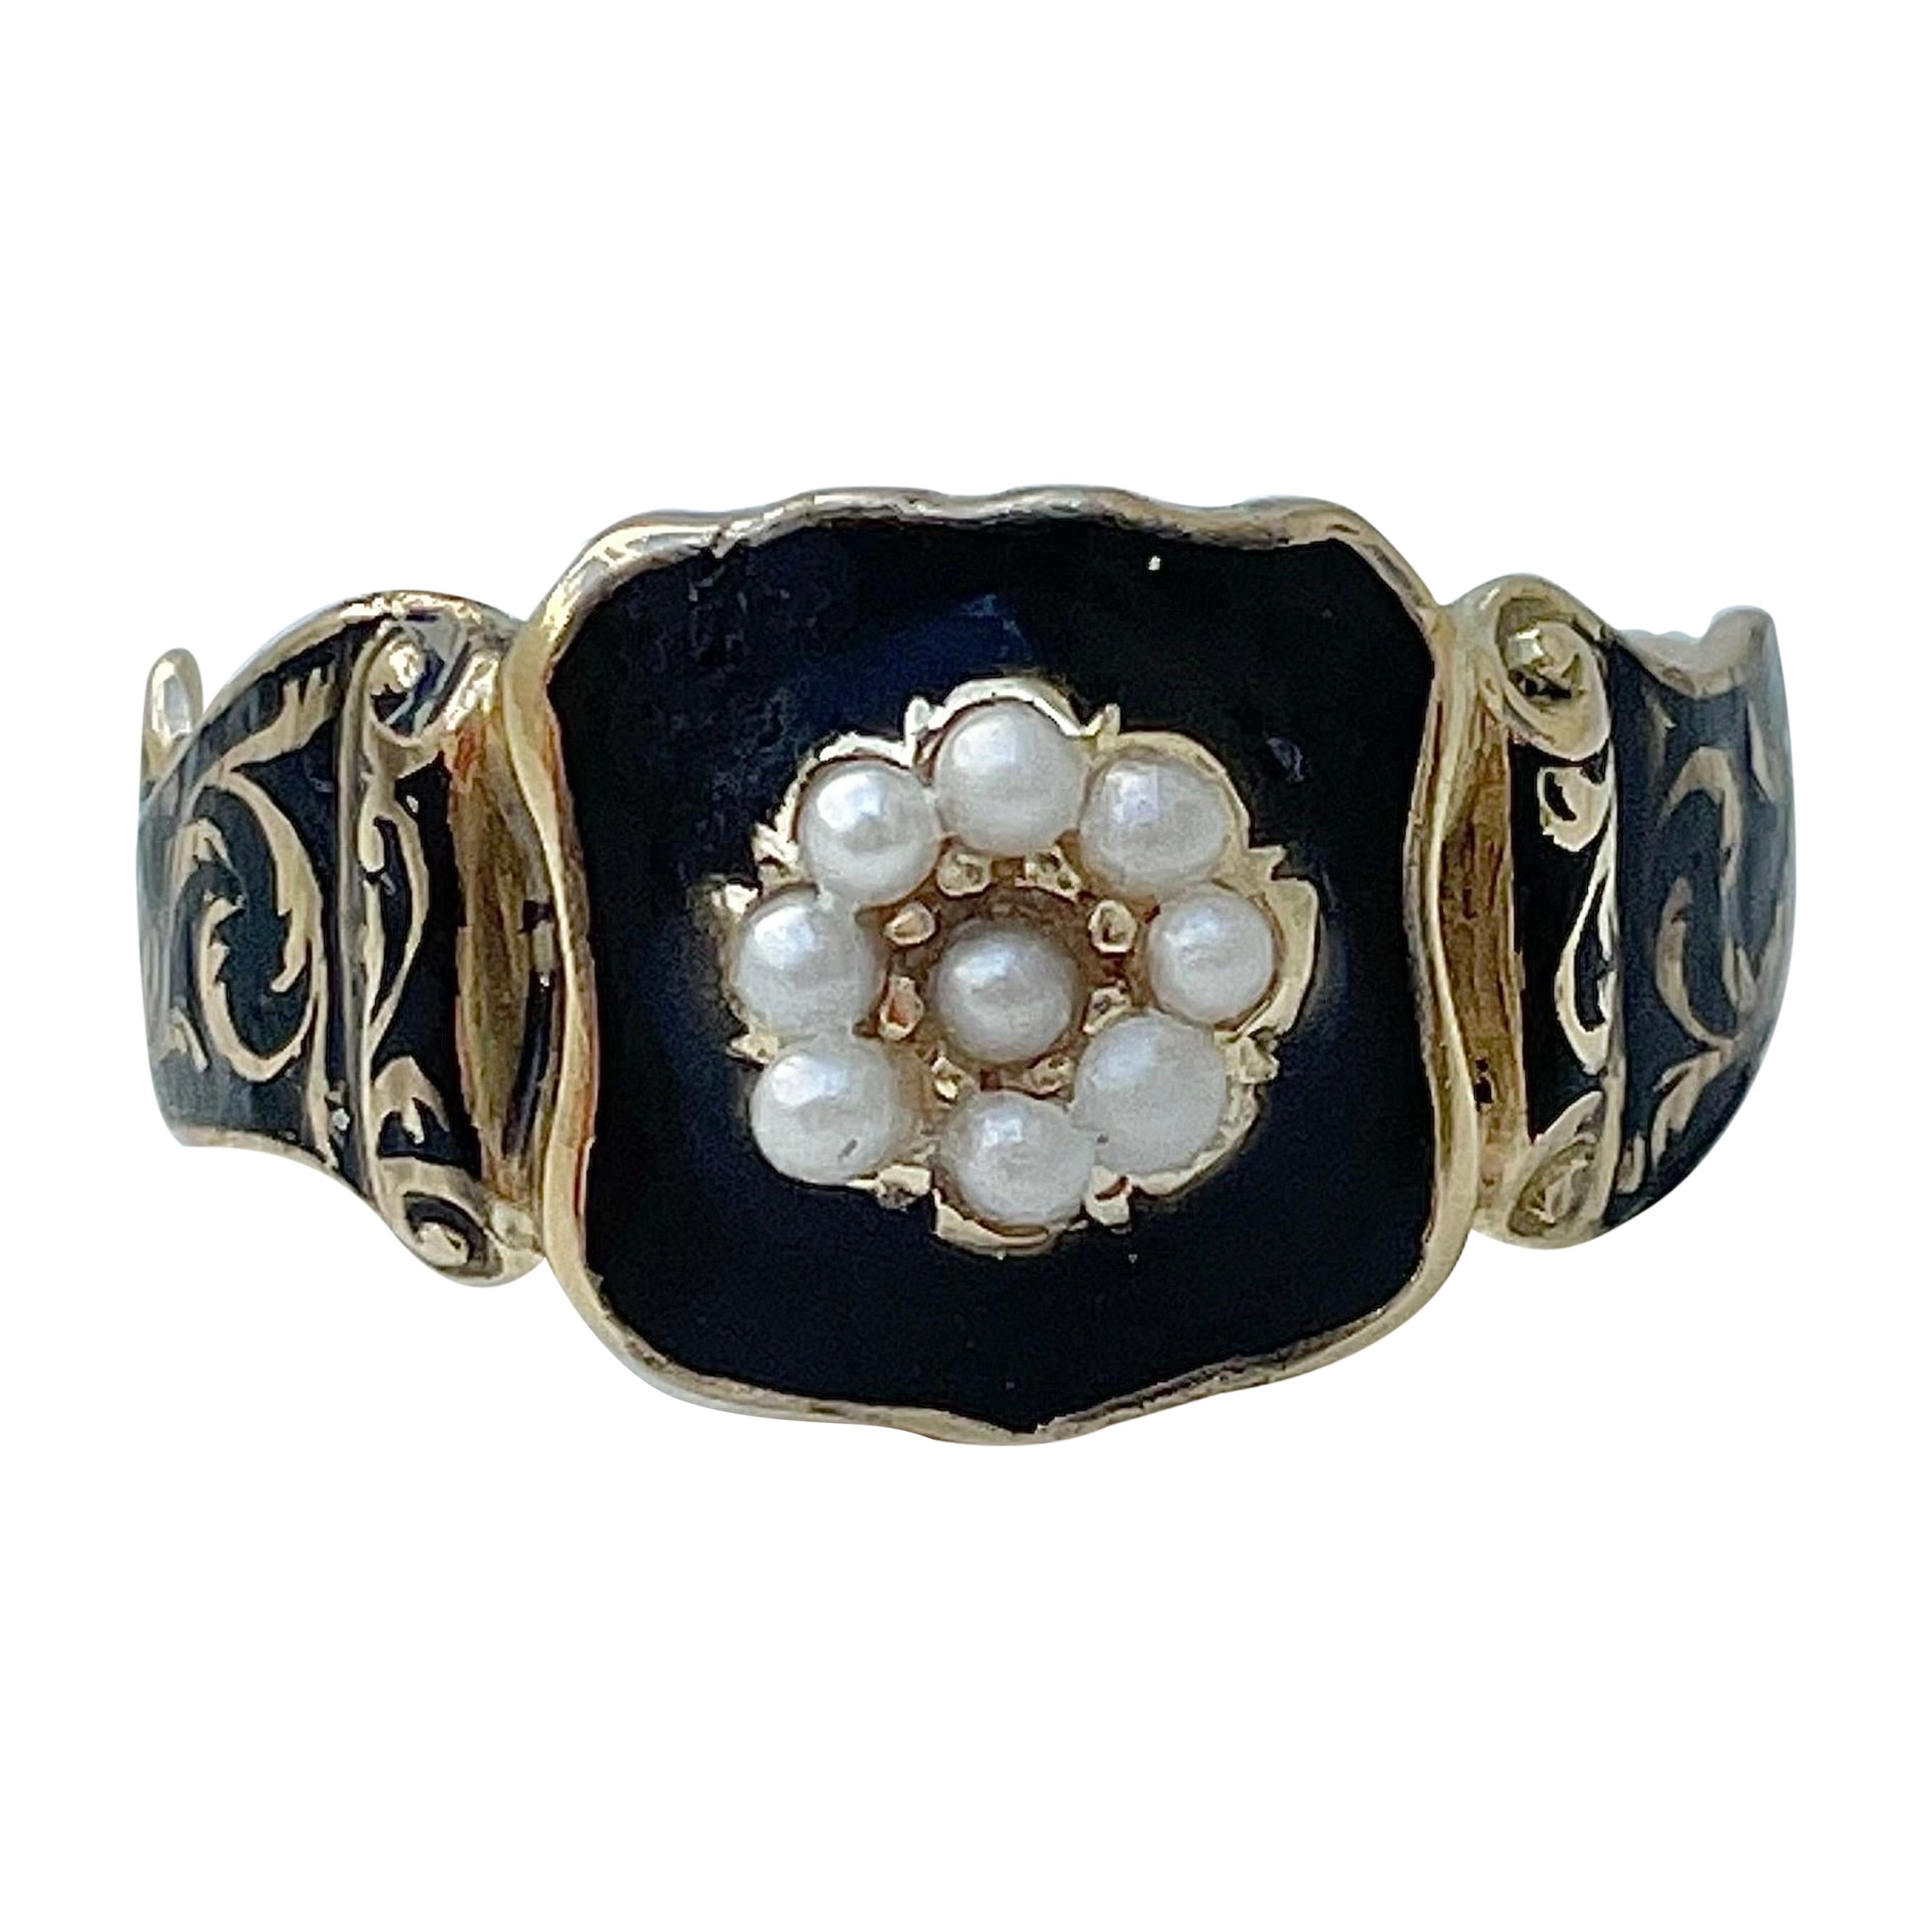 Antique Black Enamel and Pearl Mourning Ring in 18ct Yellow Gold, C.1850